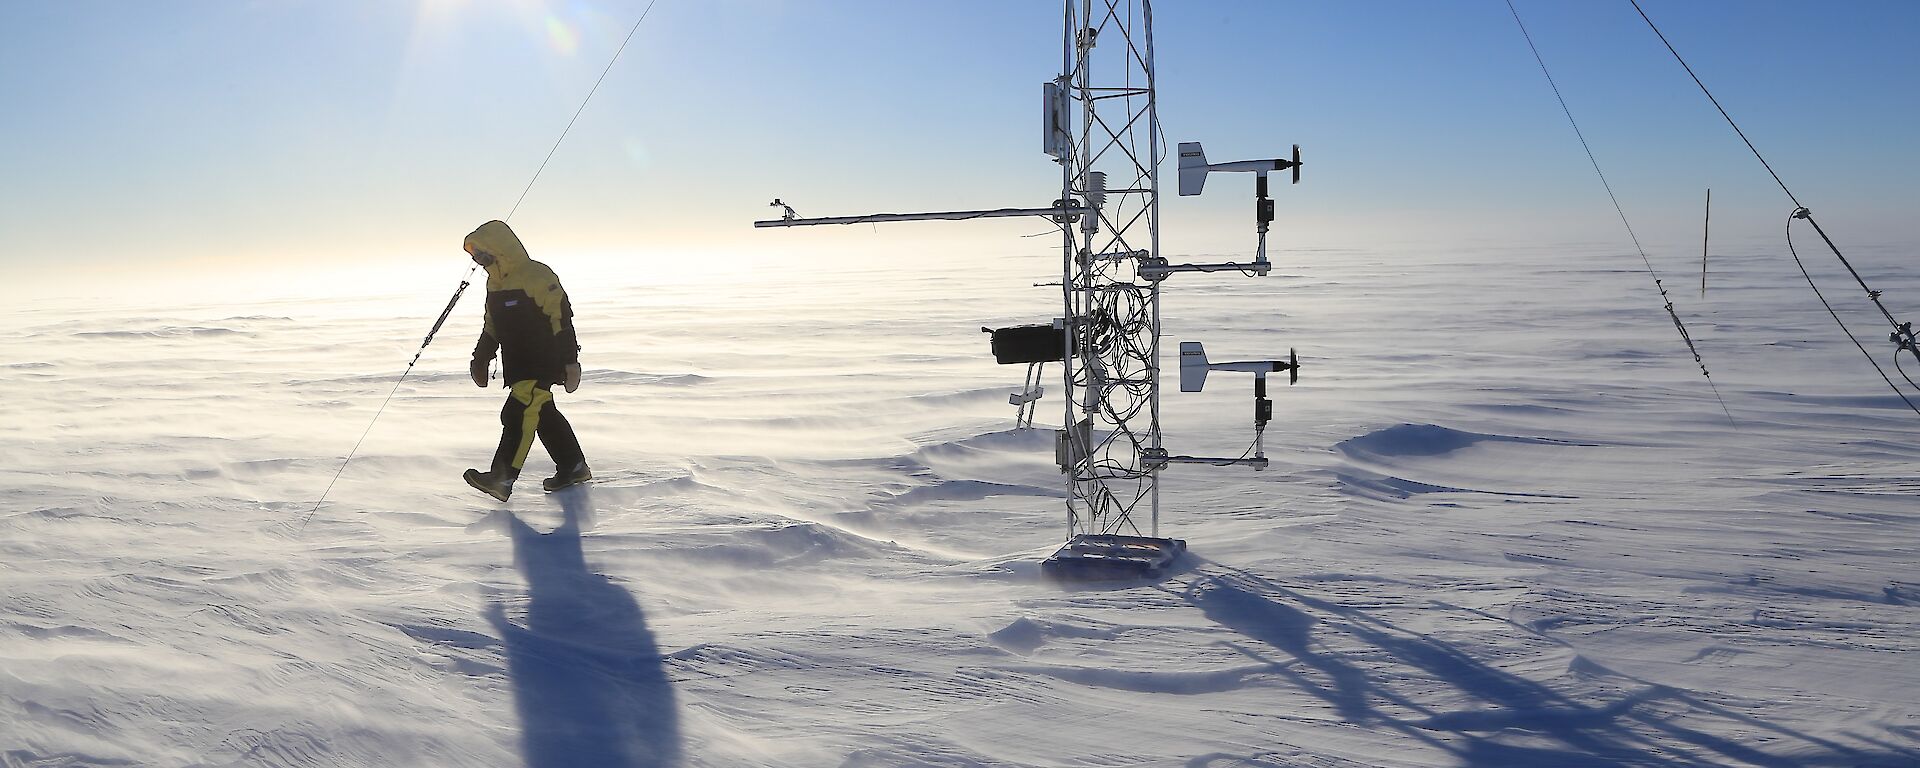 The automatic weather station in drifting snow on the plateau